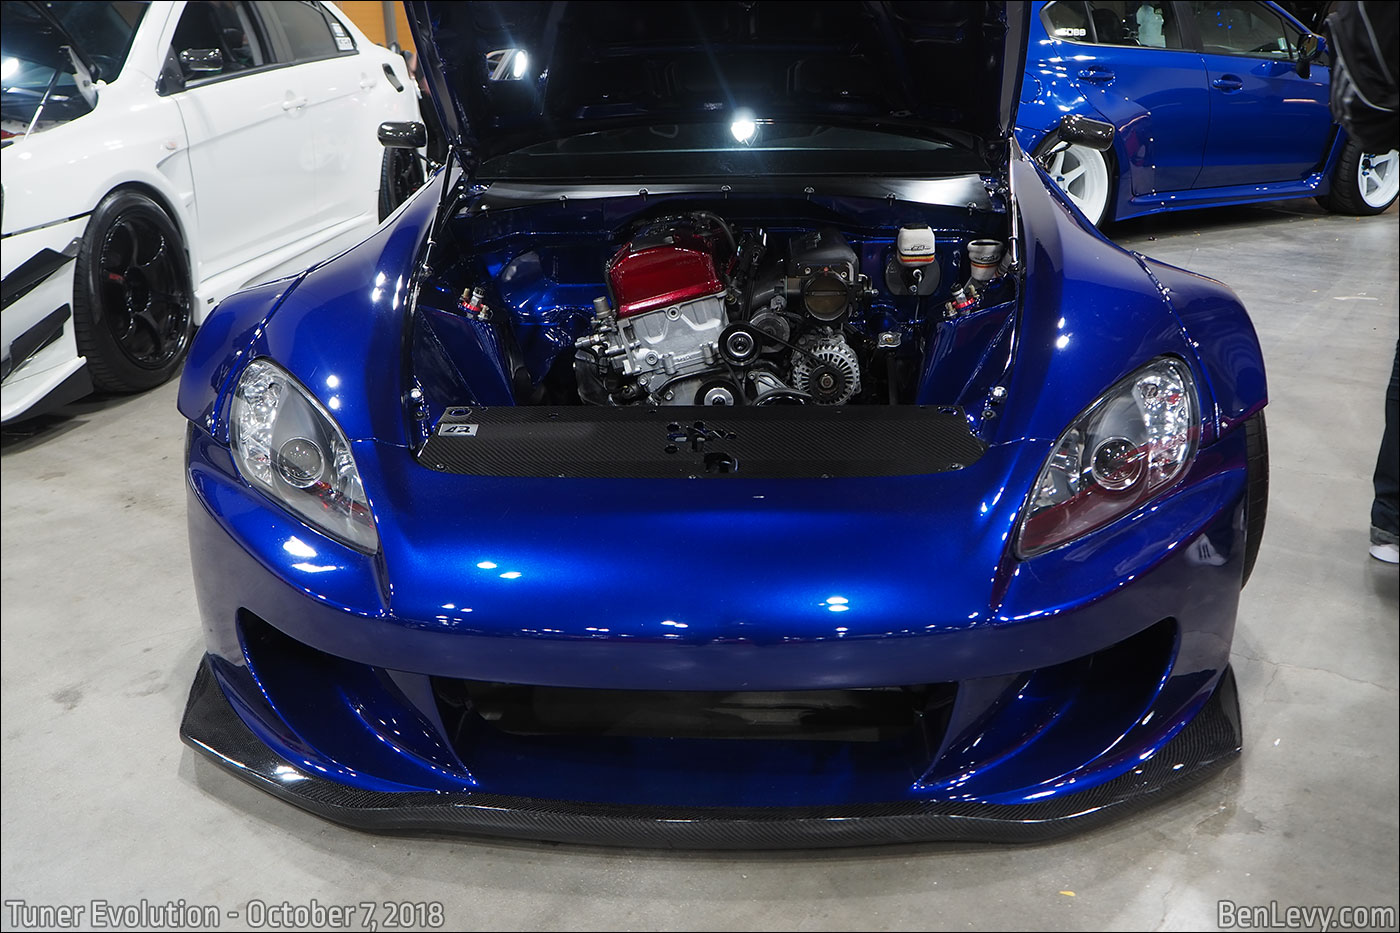 AP1 Honda S2000 with clean engine bay